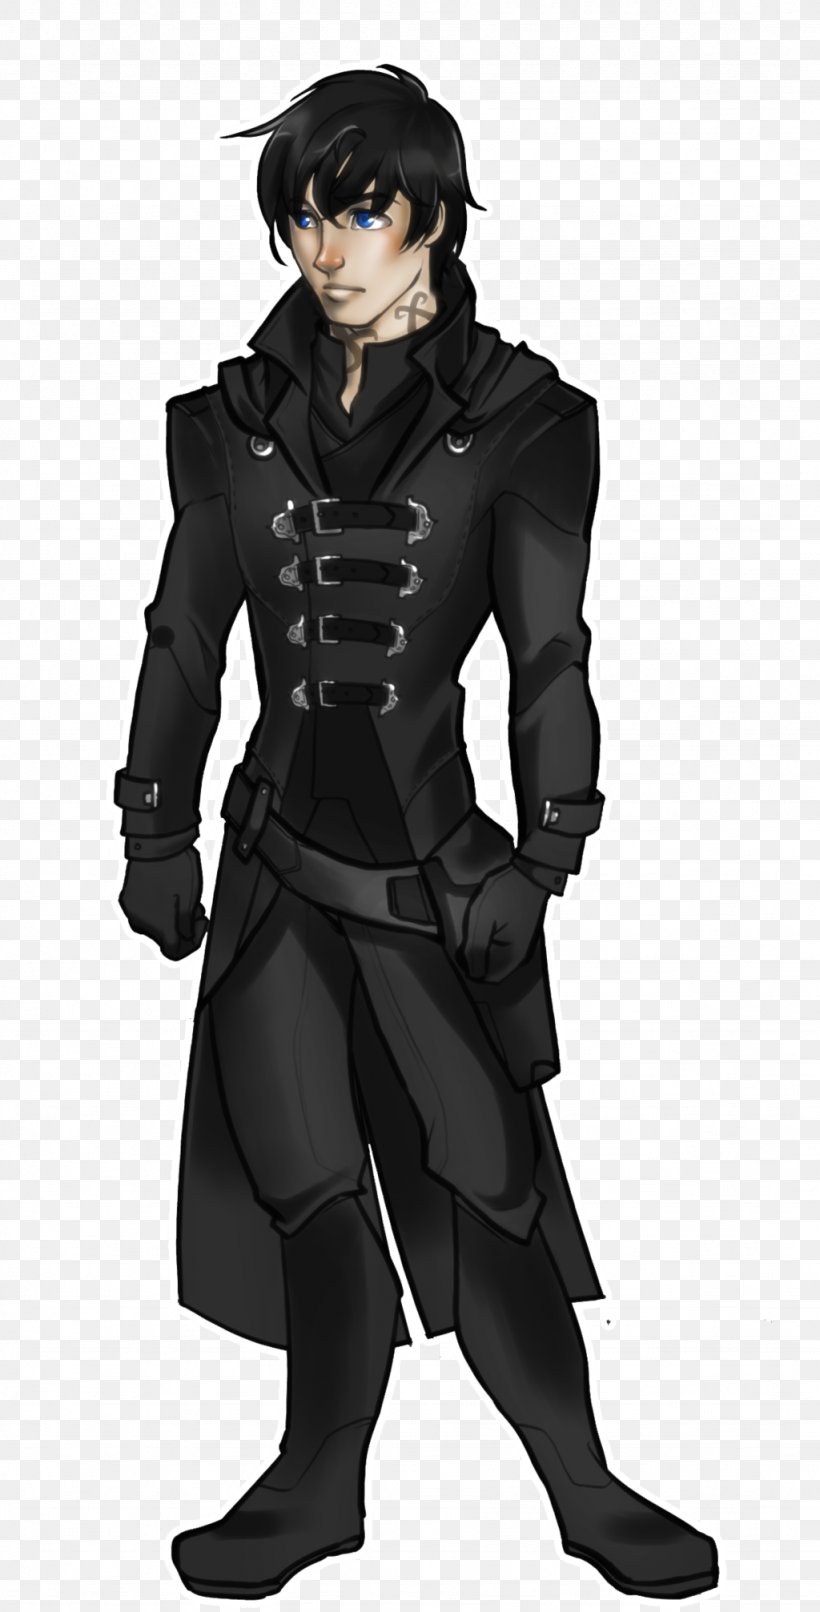 Jace Wayland Shadowhunters Drawing The Mortal Instruments Actor, PNG, 1024x2014px, Jace Wayland, Actor, Art, Costume, Costume Design Download Free